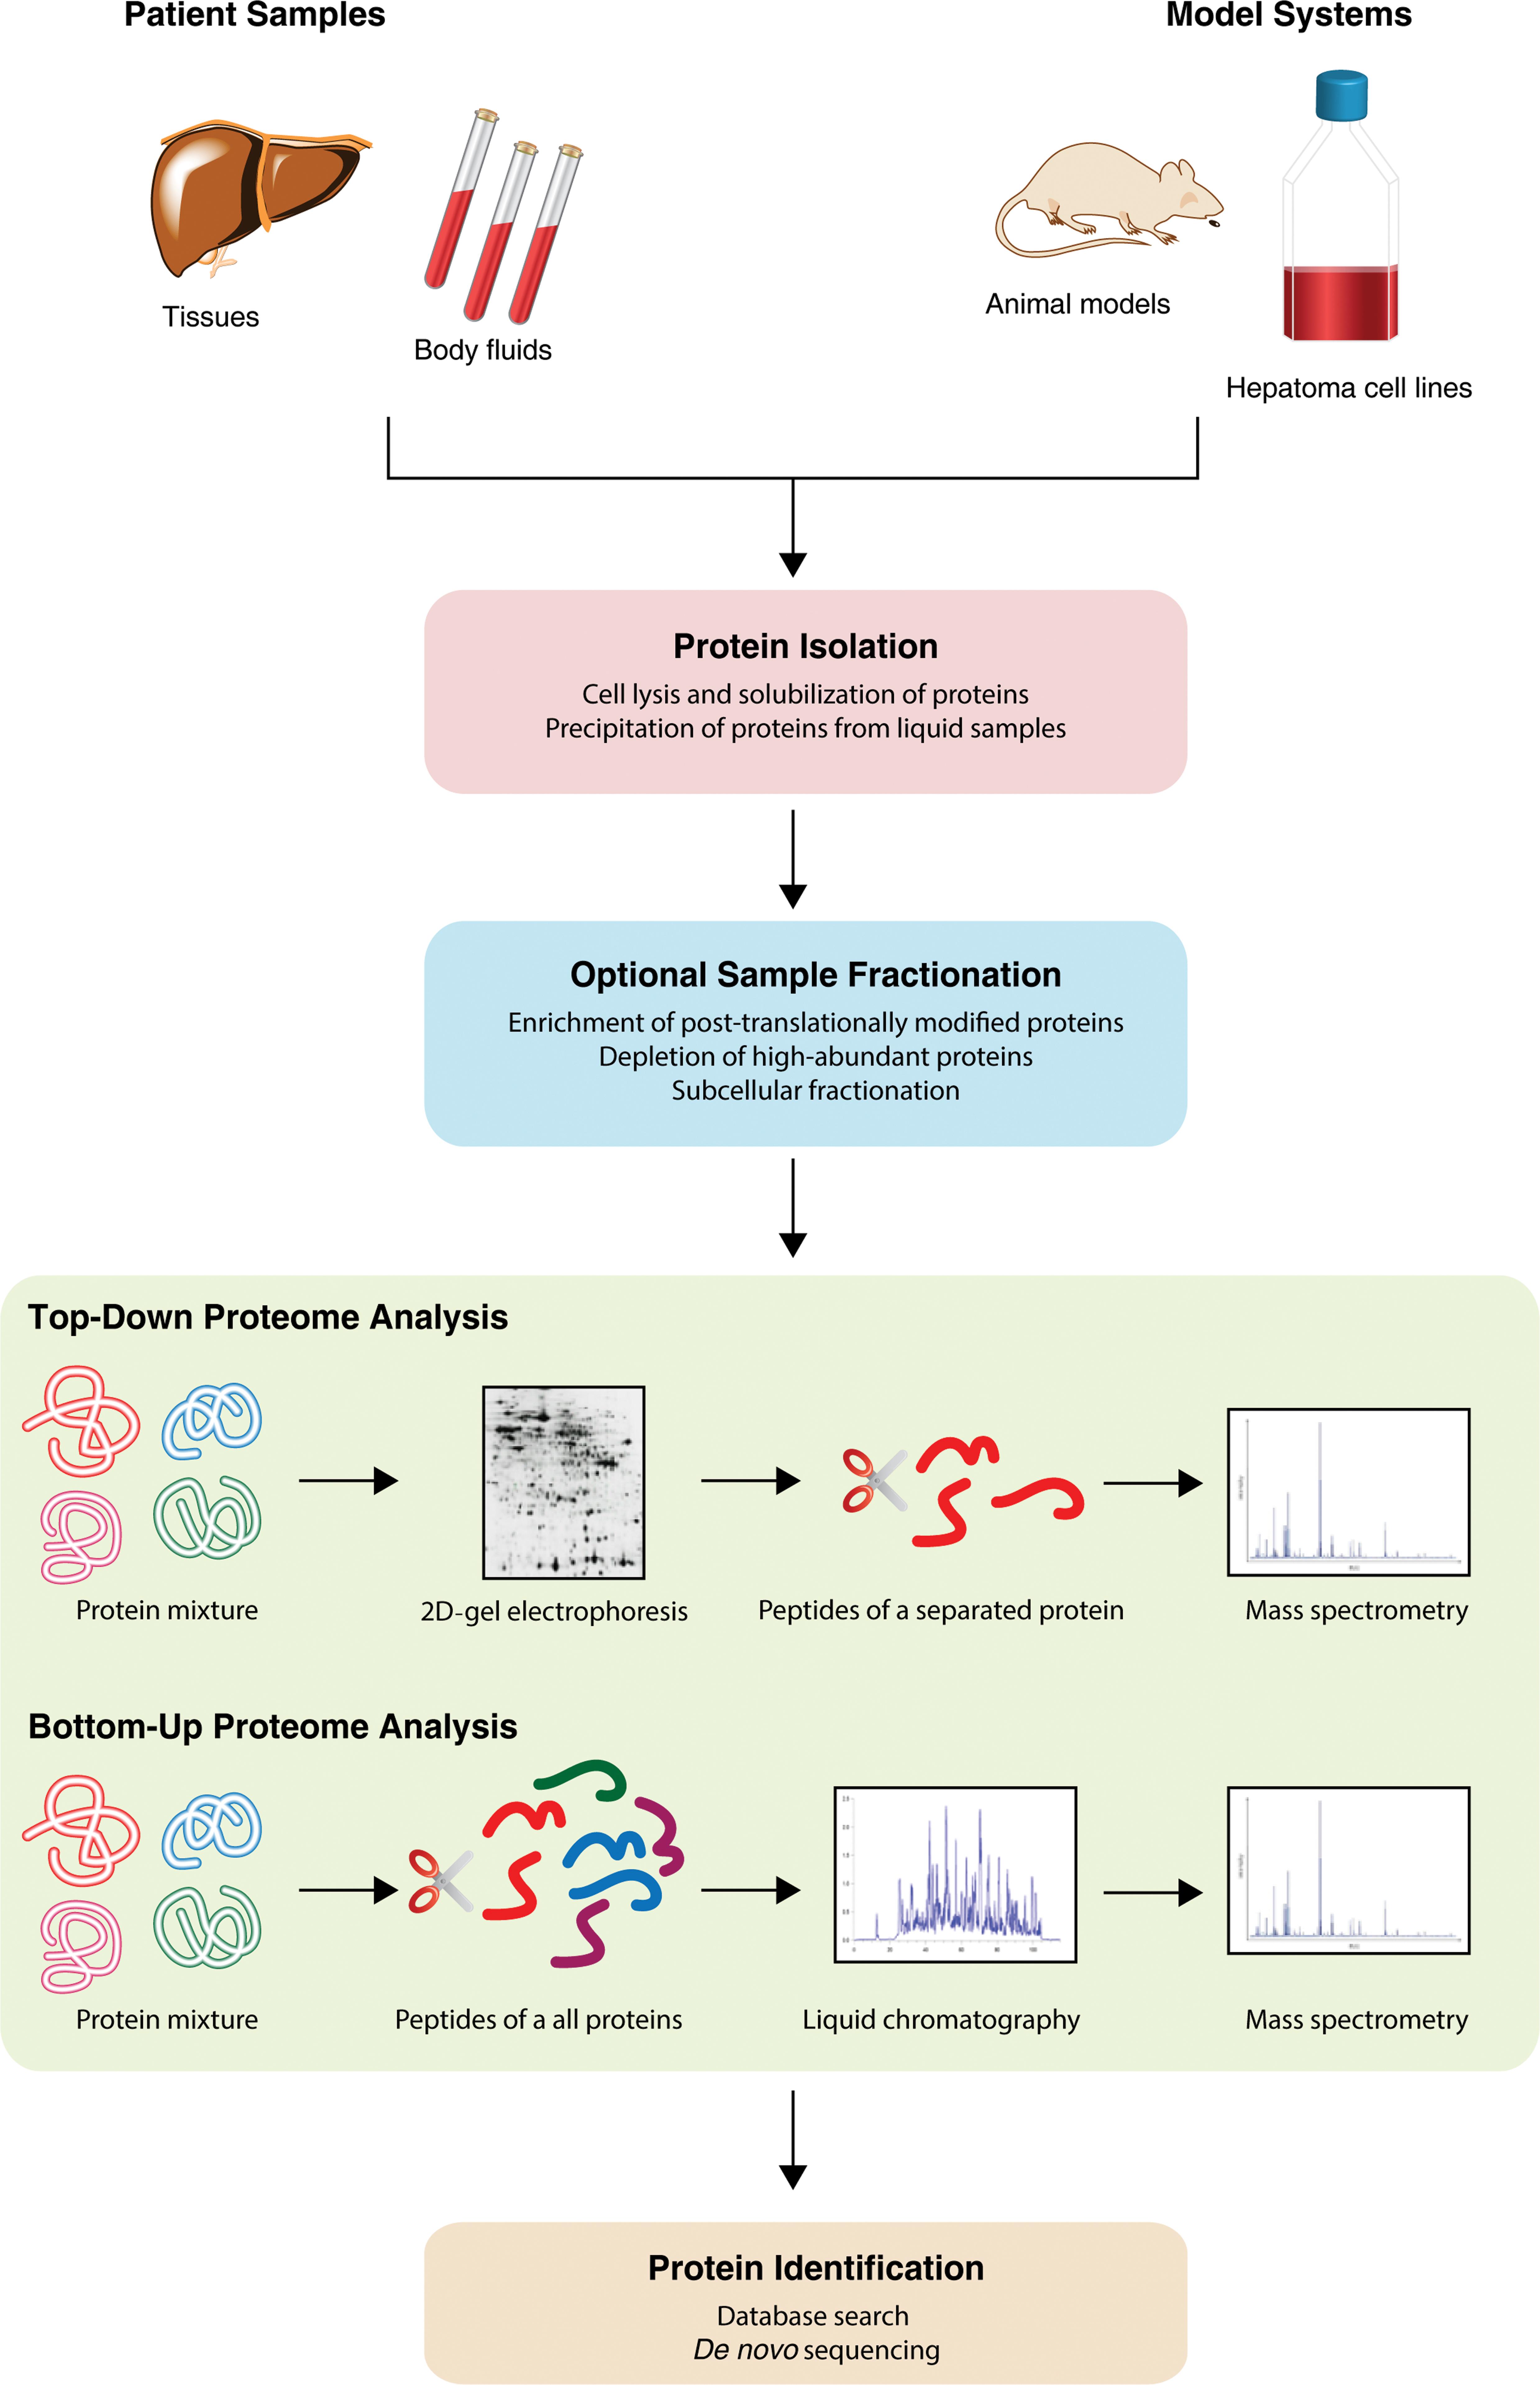 A generalized workflow of a proteomics experiment showing the different principles of top-down and bottom-up proteome analyses.